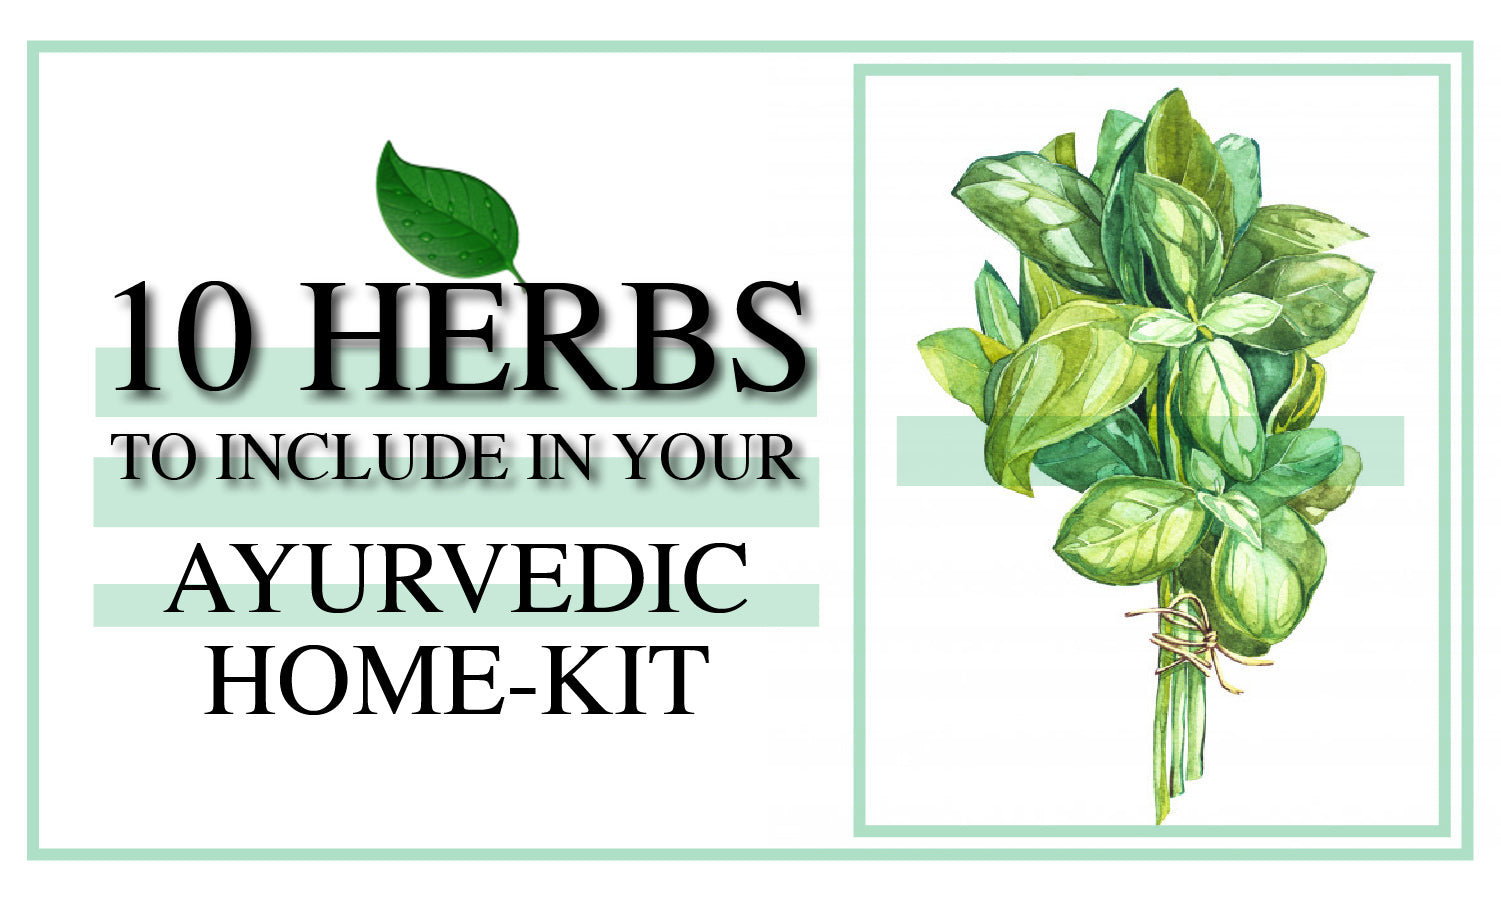 10 herbs to include in your Ayurvedic home-Kit